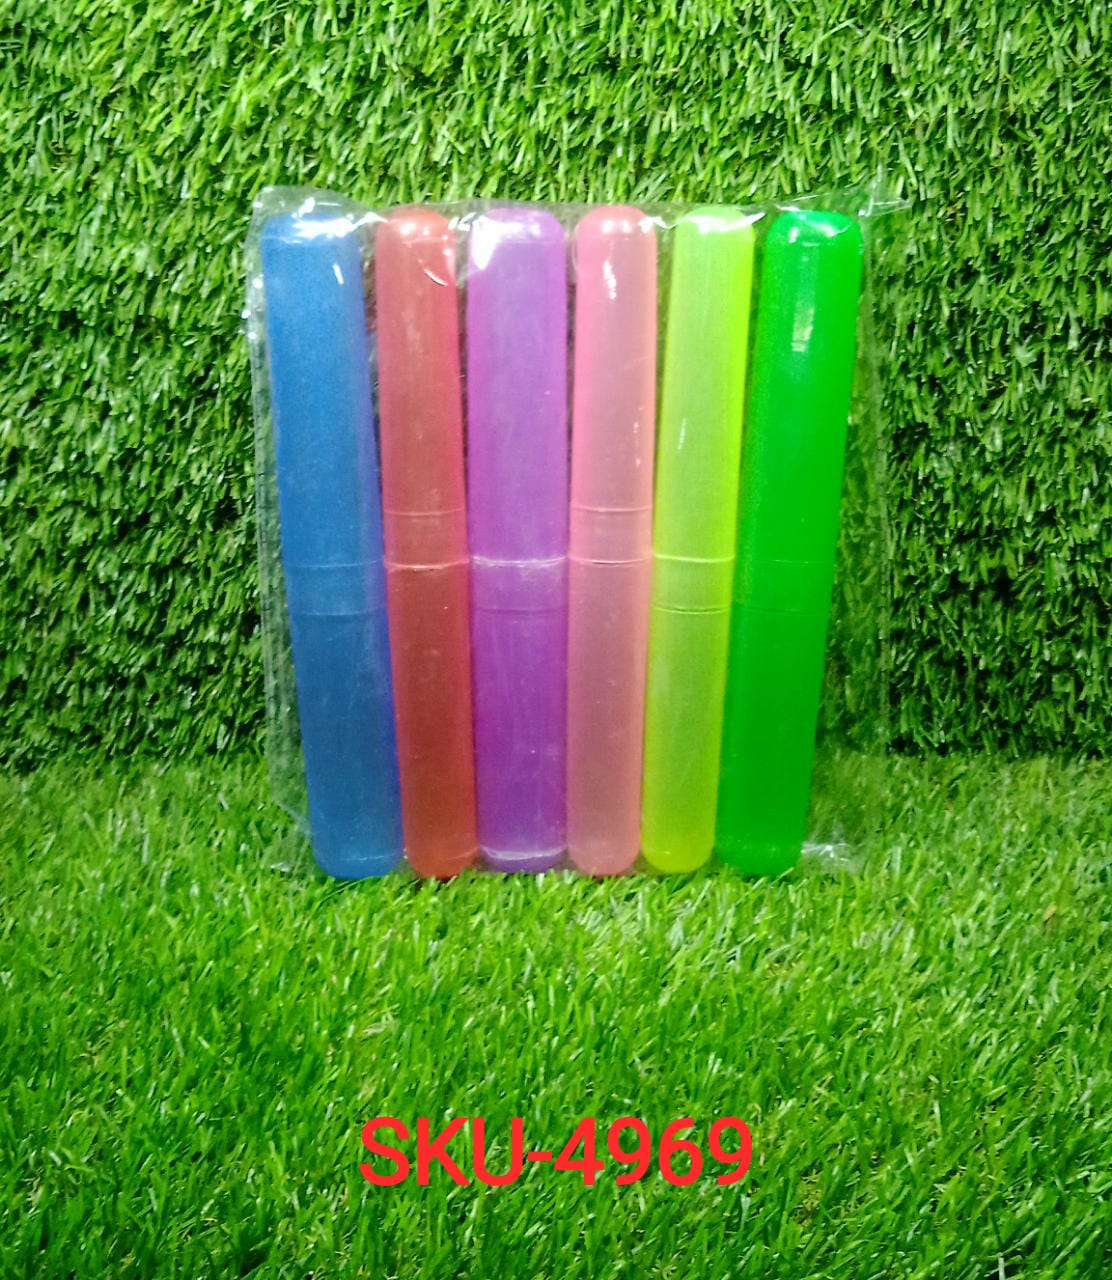 4969 6Pc Plastic Toothbrush Cover, Anti Bacterial Toothbrush Container- Tooth Brush Travel Covers, Case, Holder, Cases DeoDap